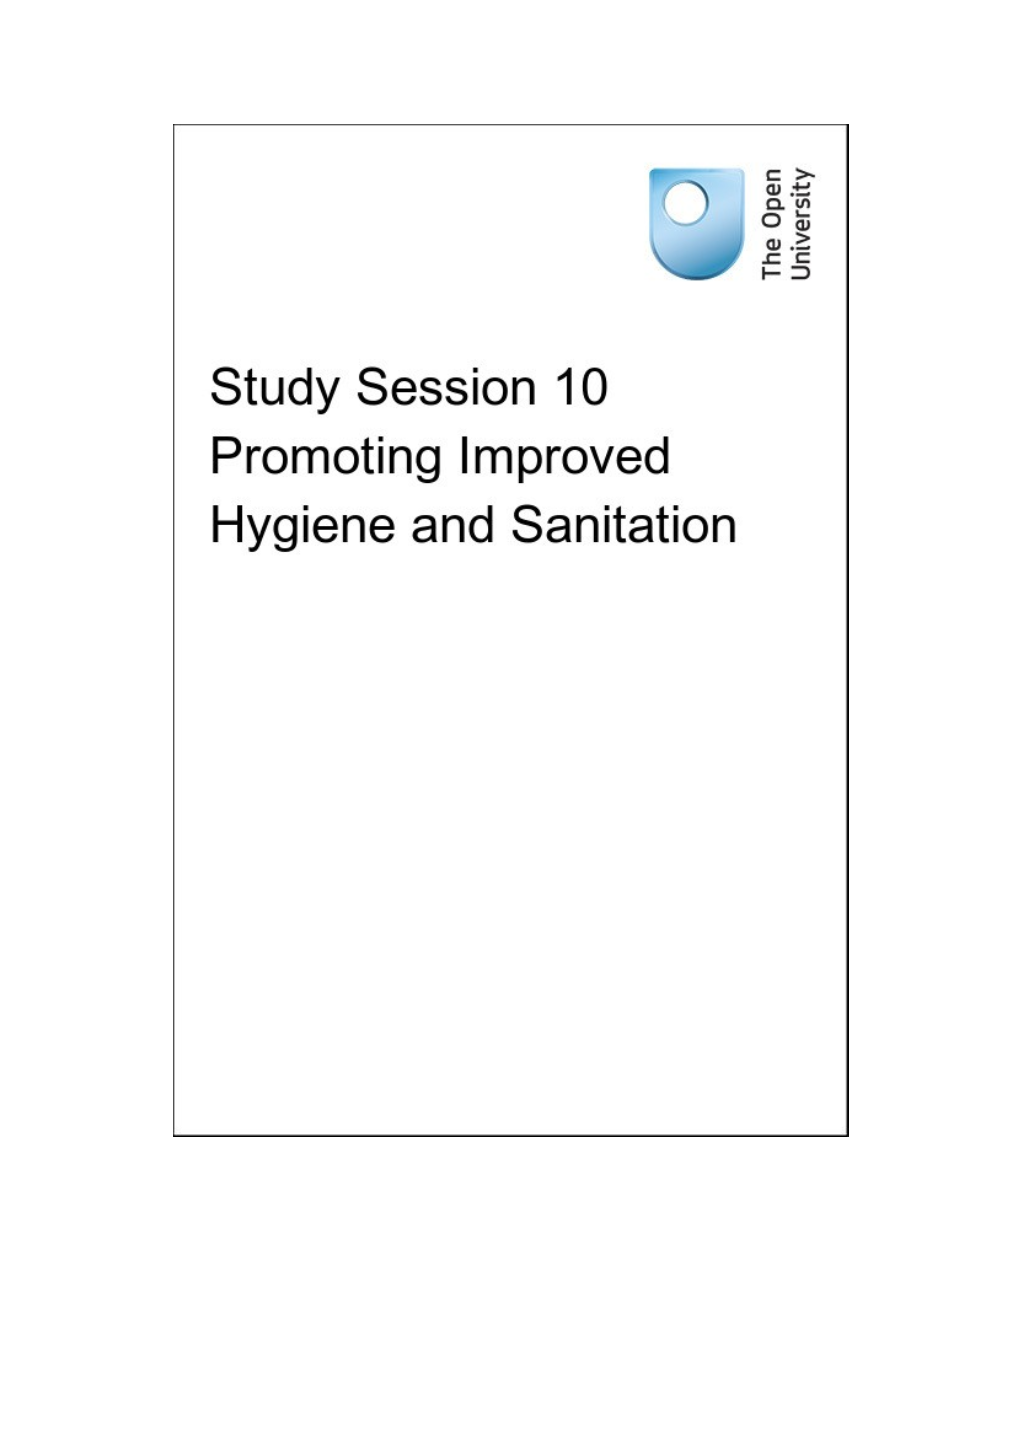 Study Session 10 Promoting Improved Hygiene and Sanitation